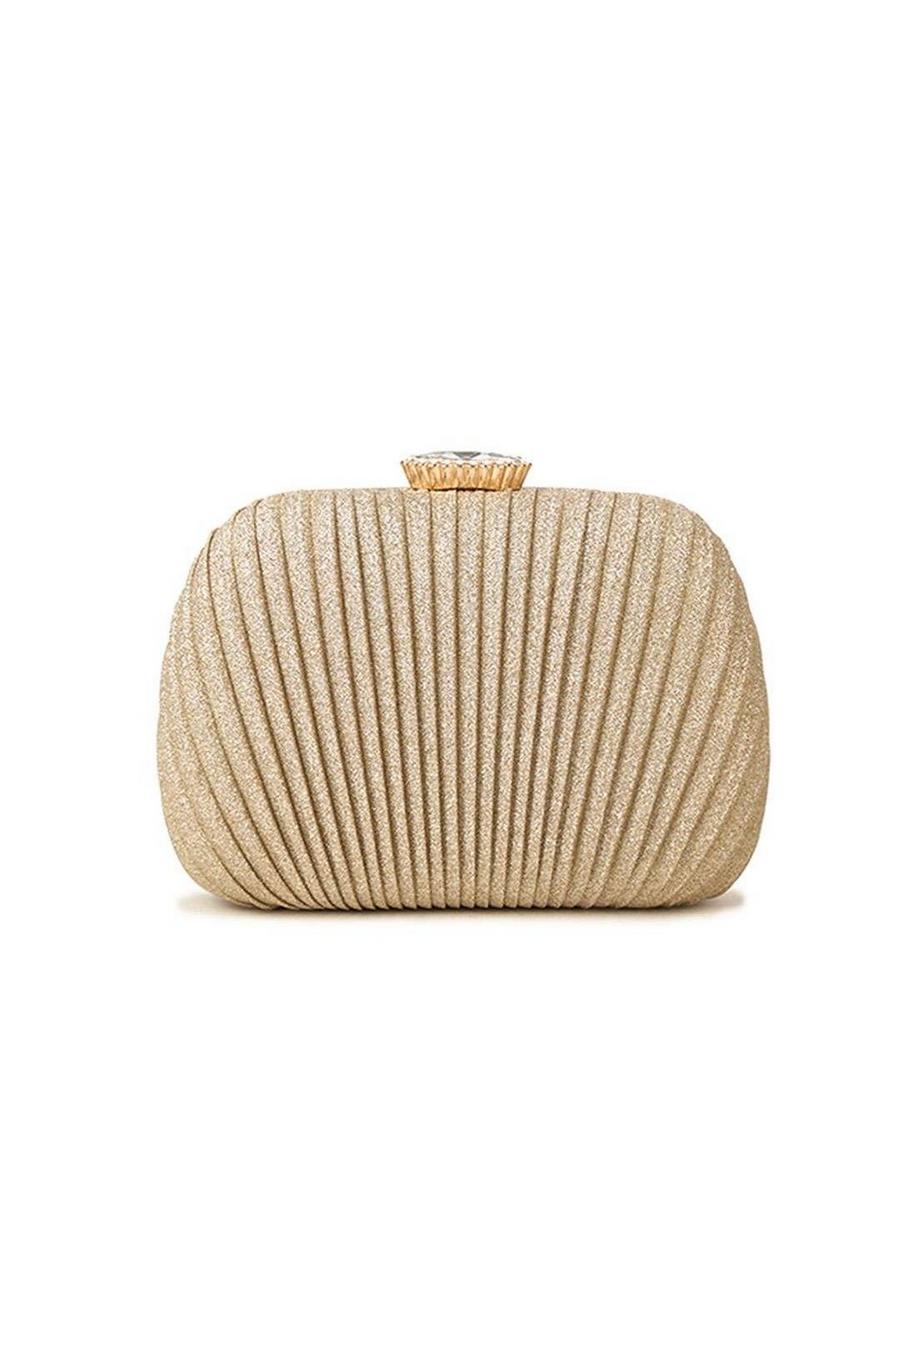 Gold Diamante Crystal  Clasp  Pleated Shell Clutch Evening Bag